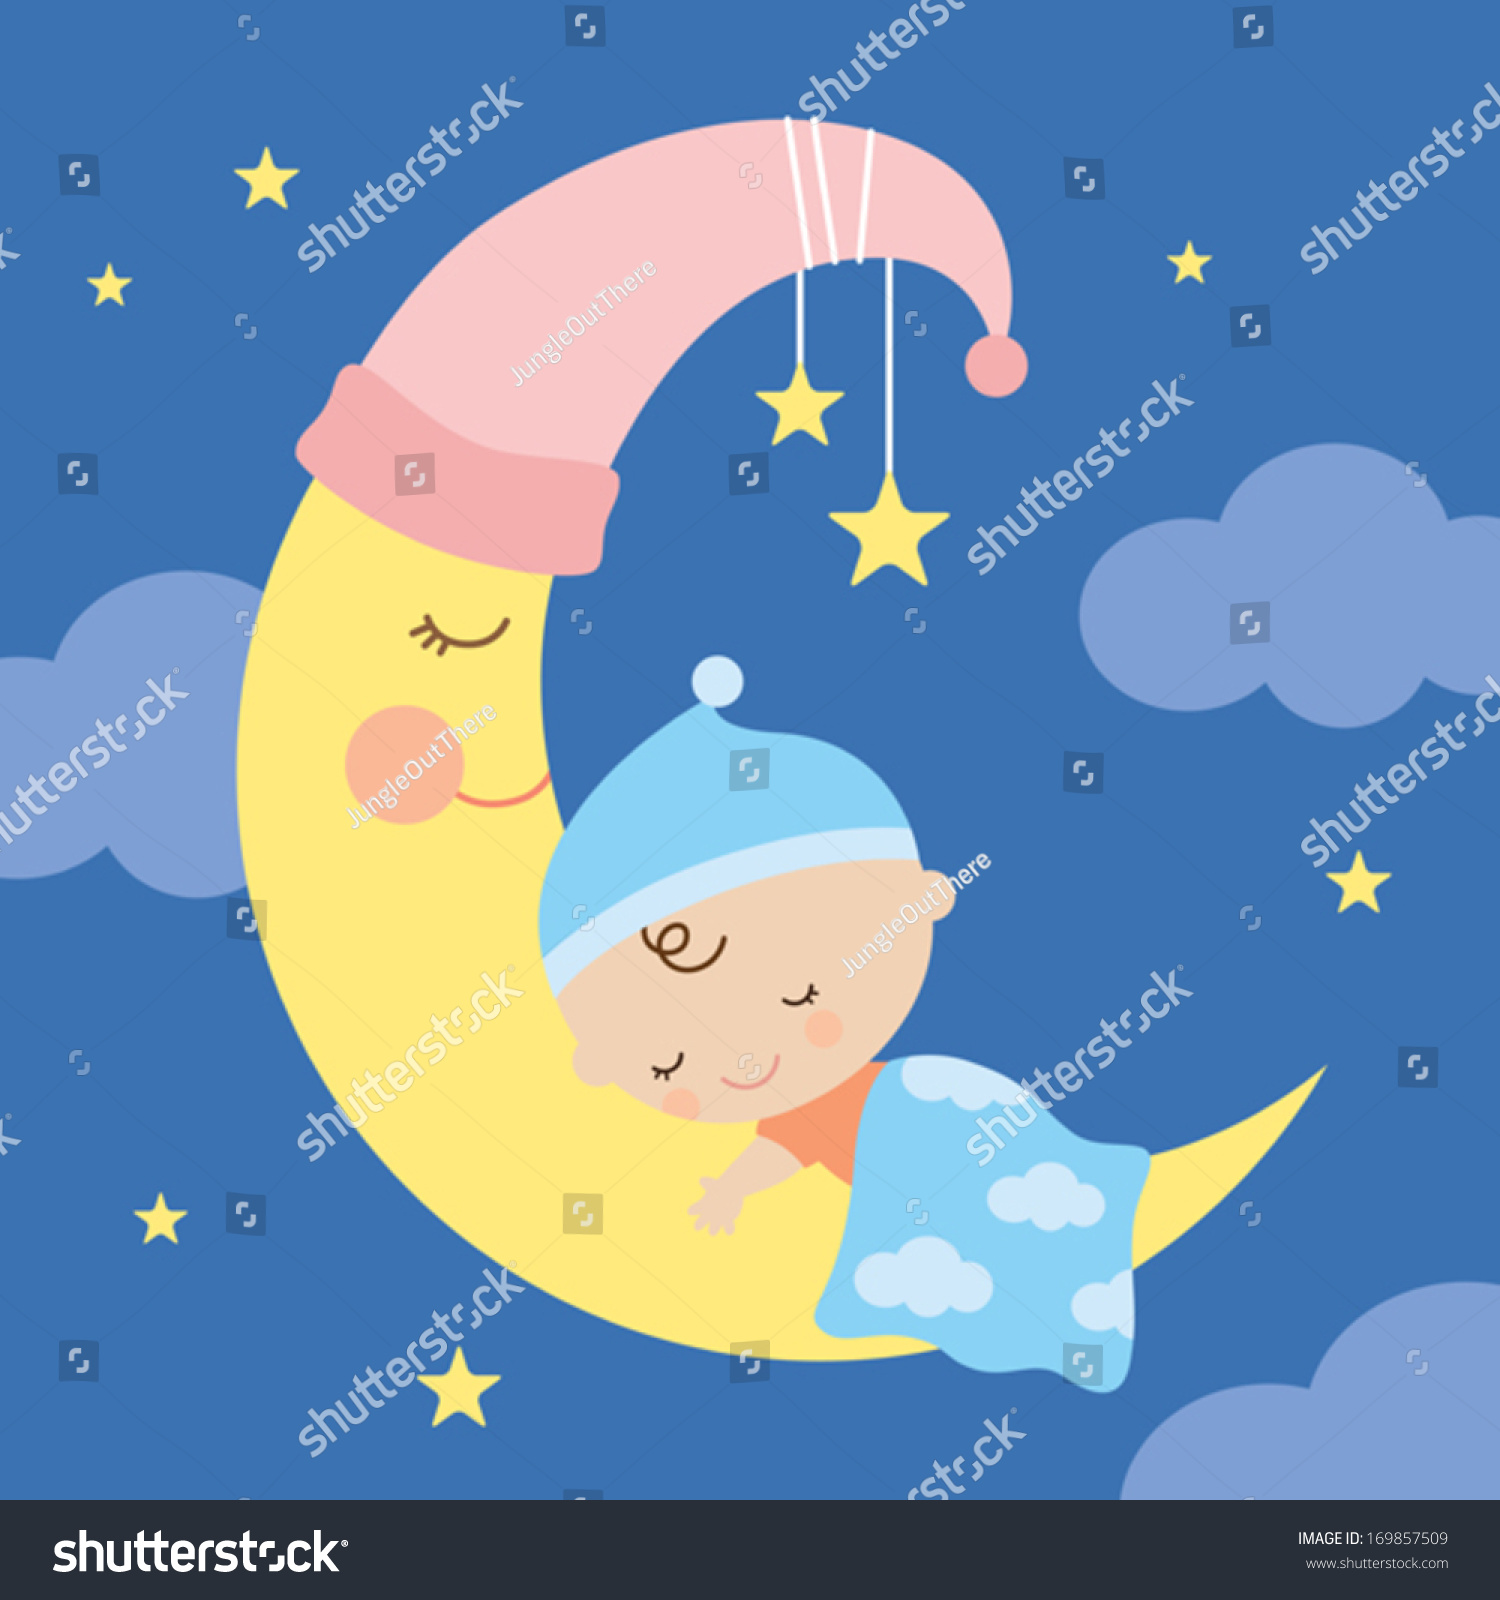 Vector Illustration Of A Baby Sleeping On The Moon. - 169857509 ...